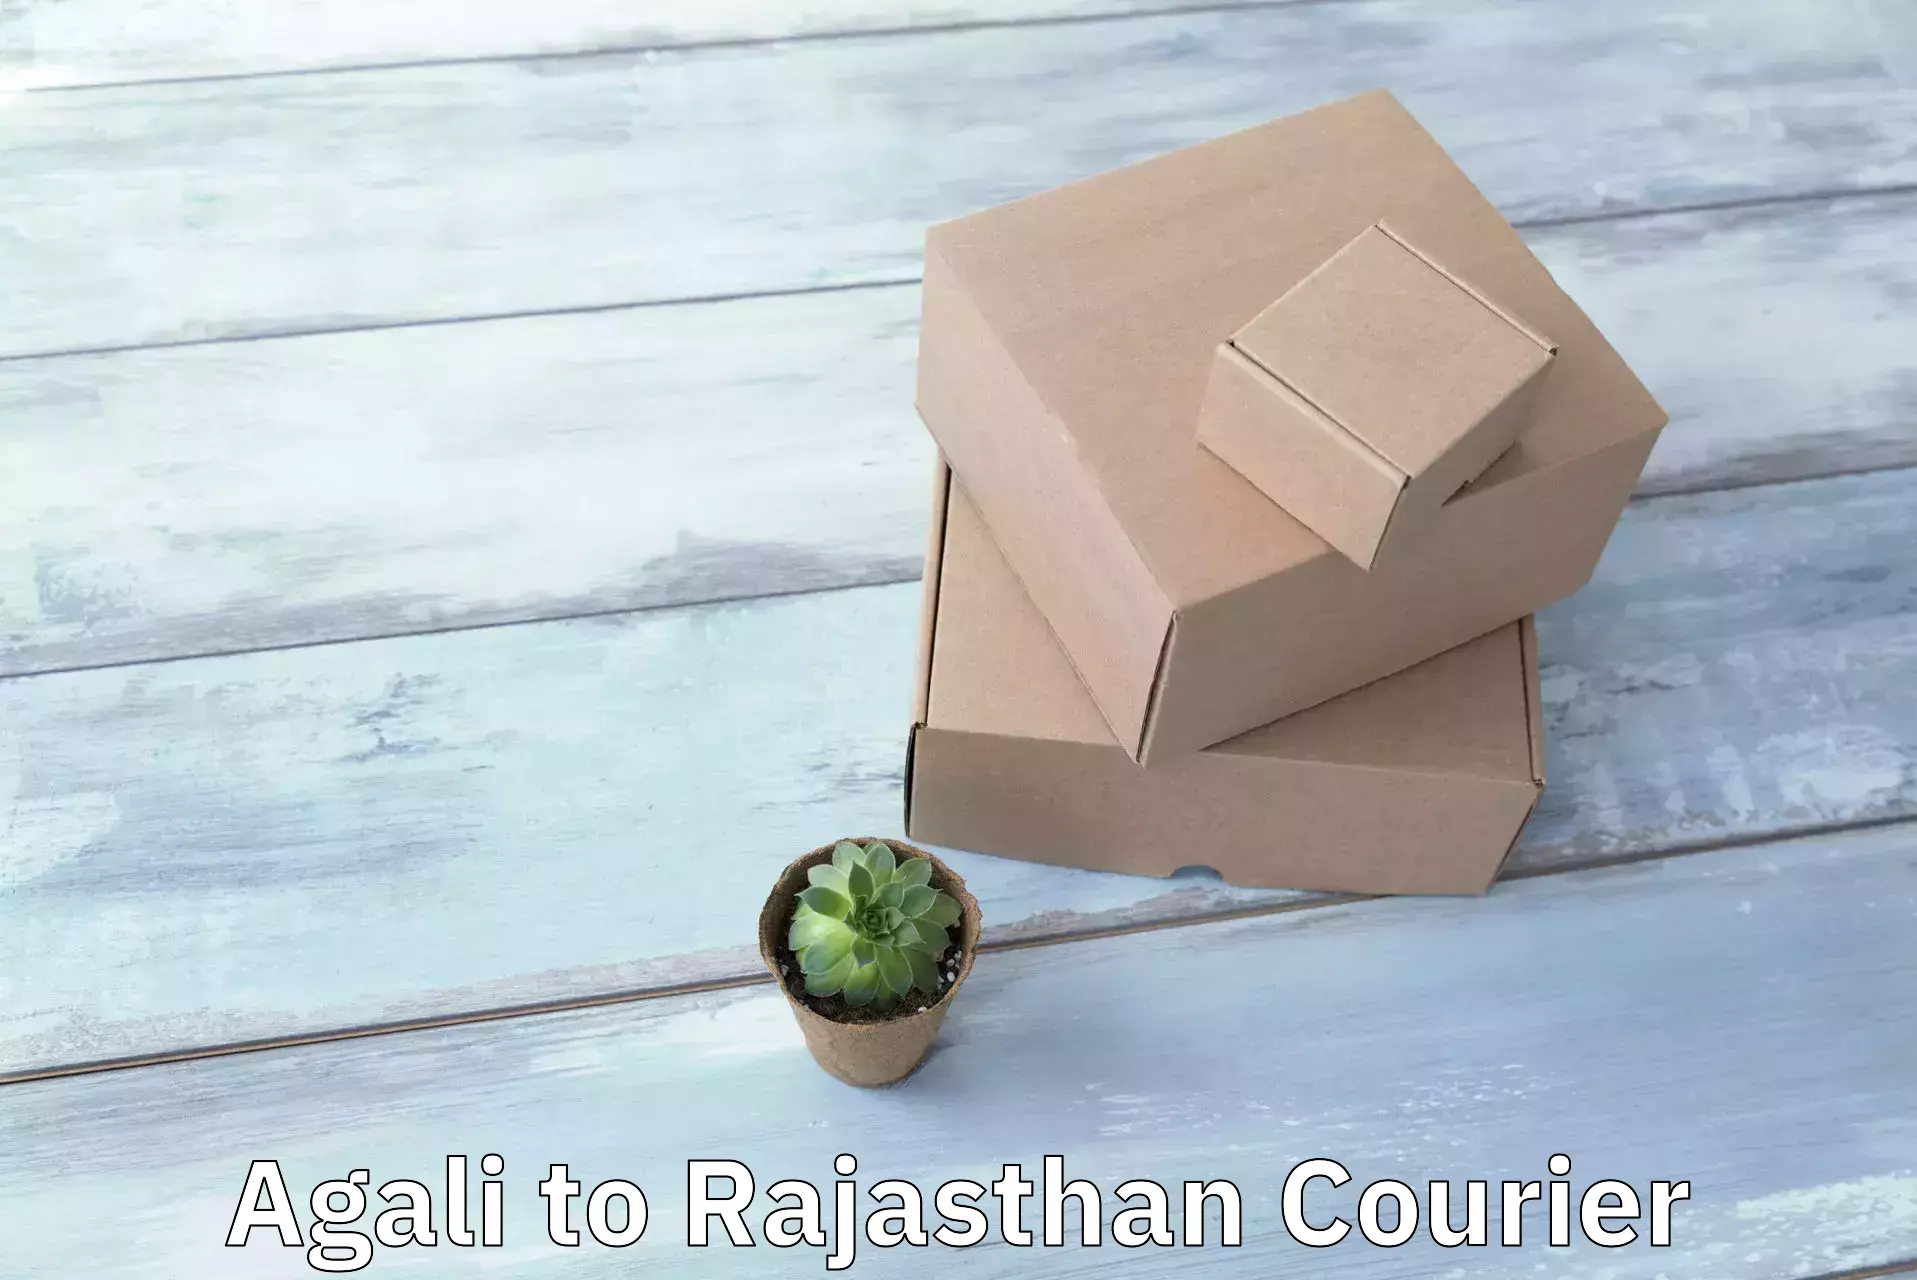 Expedited shipping methods Agali to Rajasthan